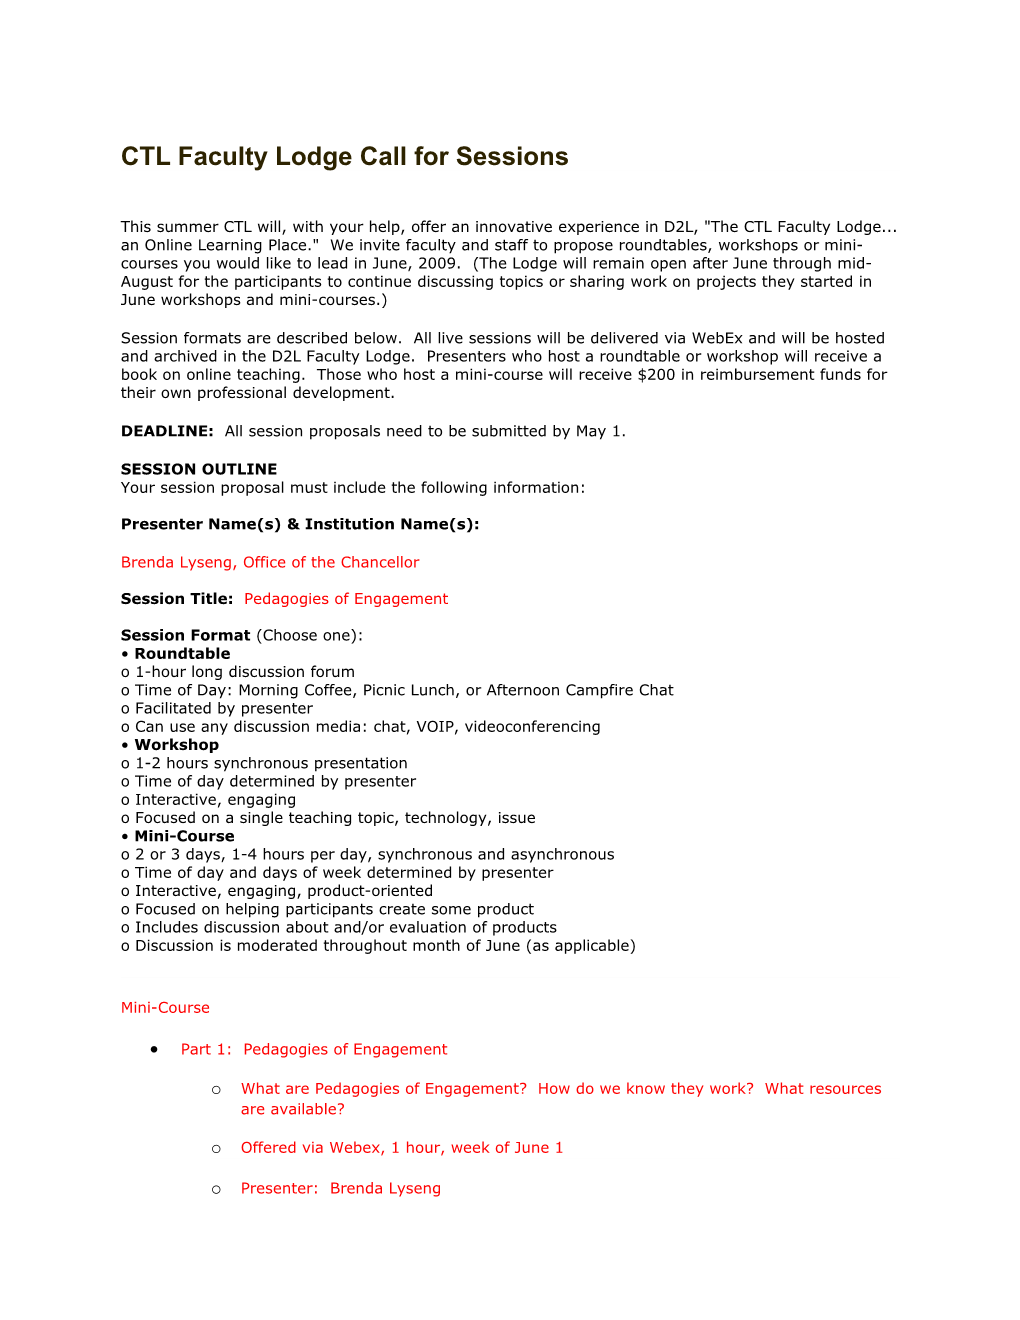 CTL Faculty Lodge Call for Sessions